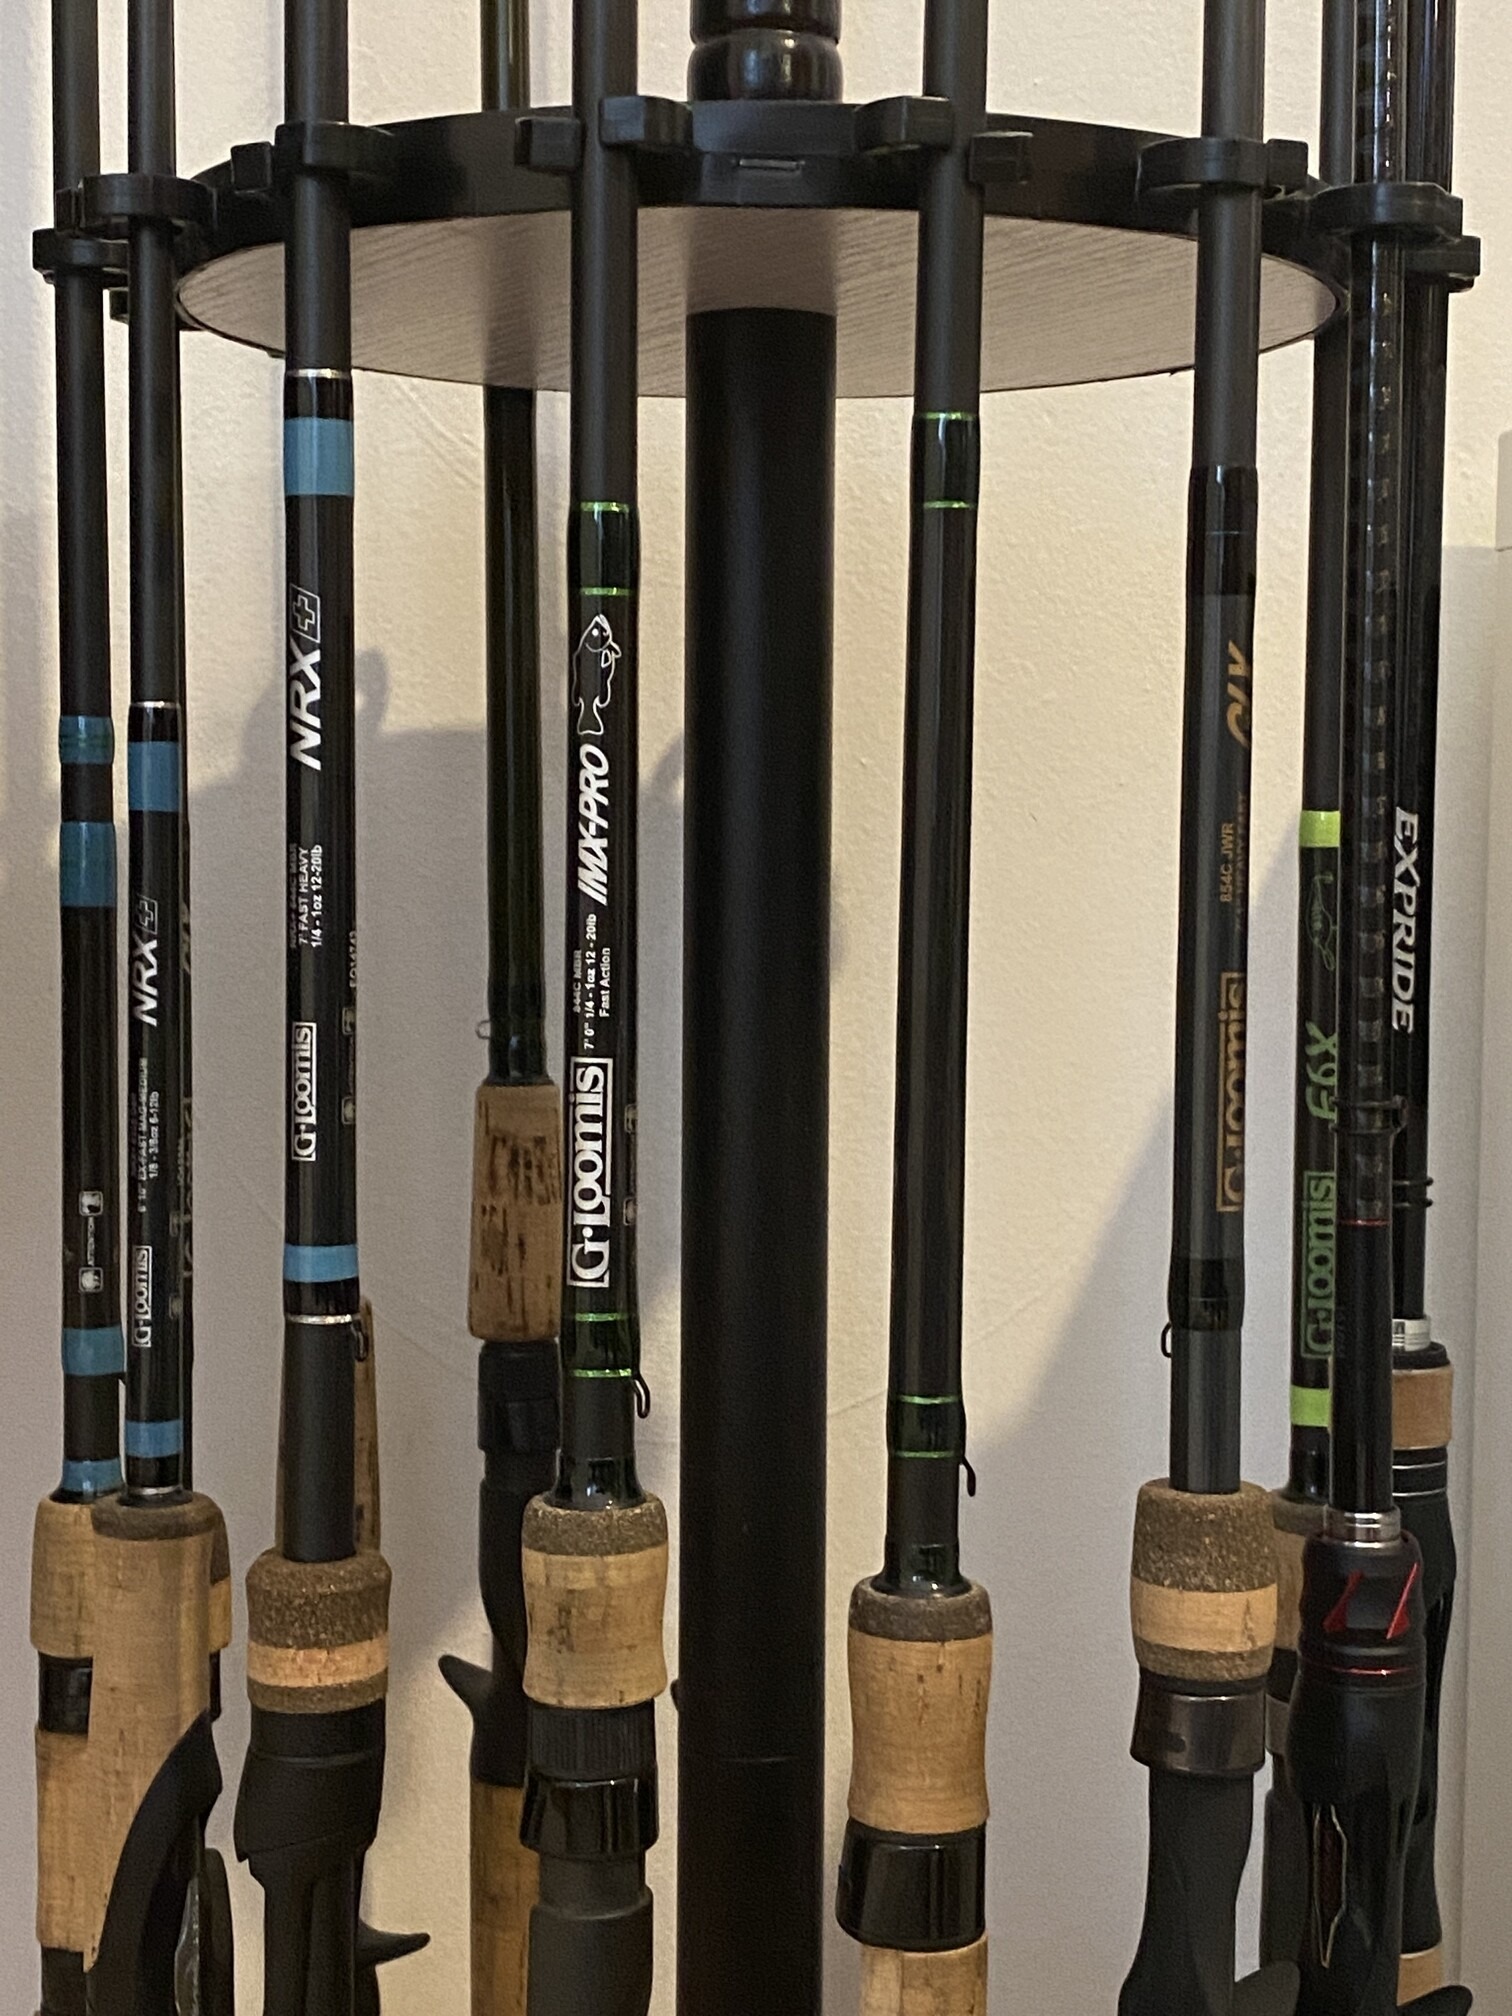 Share your rod arsenal - Fishing Rods, Reels, Line, and Knots